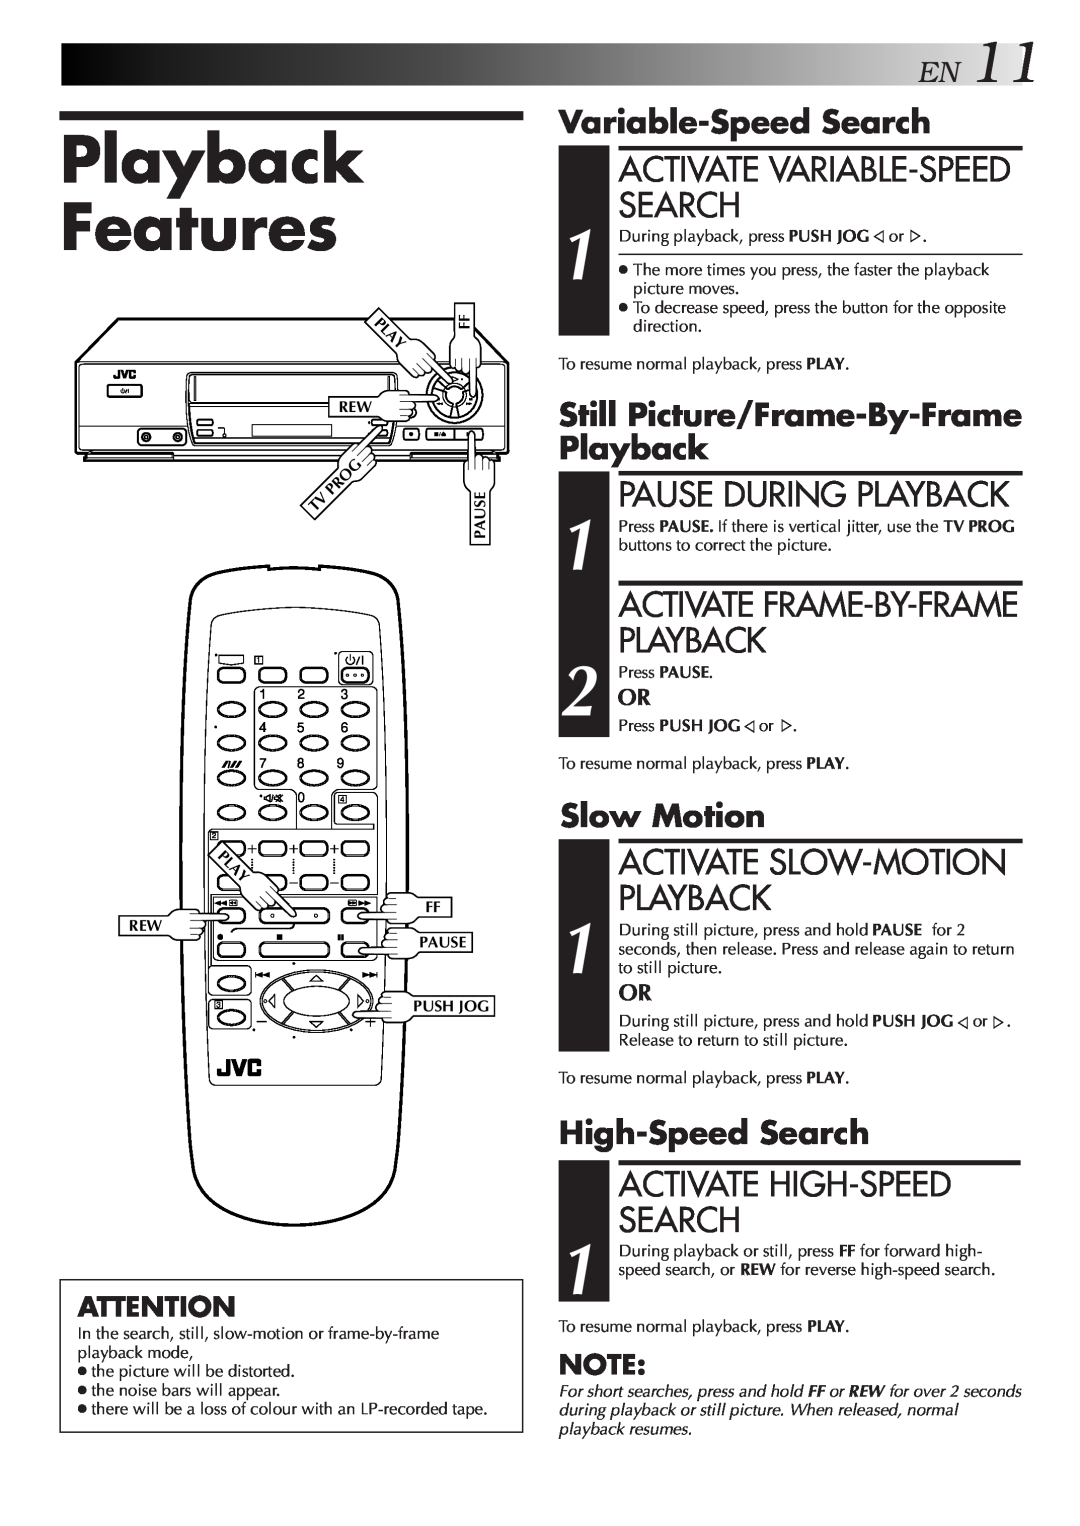 JVC HR-J457MS Playback Features, EN11, Activate Slow-Motion Playback, Activate High-Speed Search, Slow Motion 